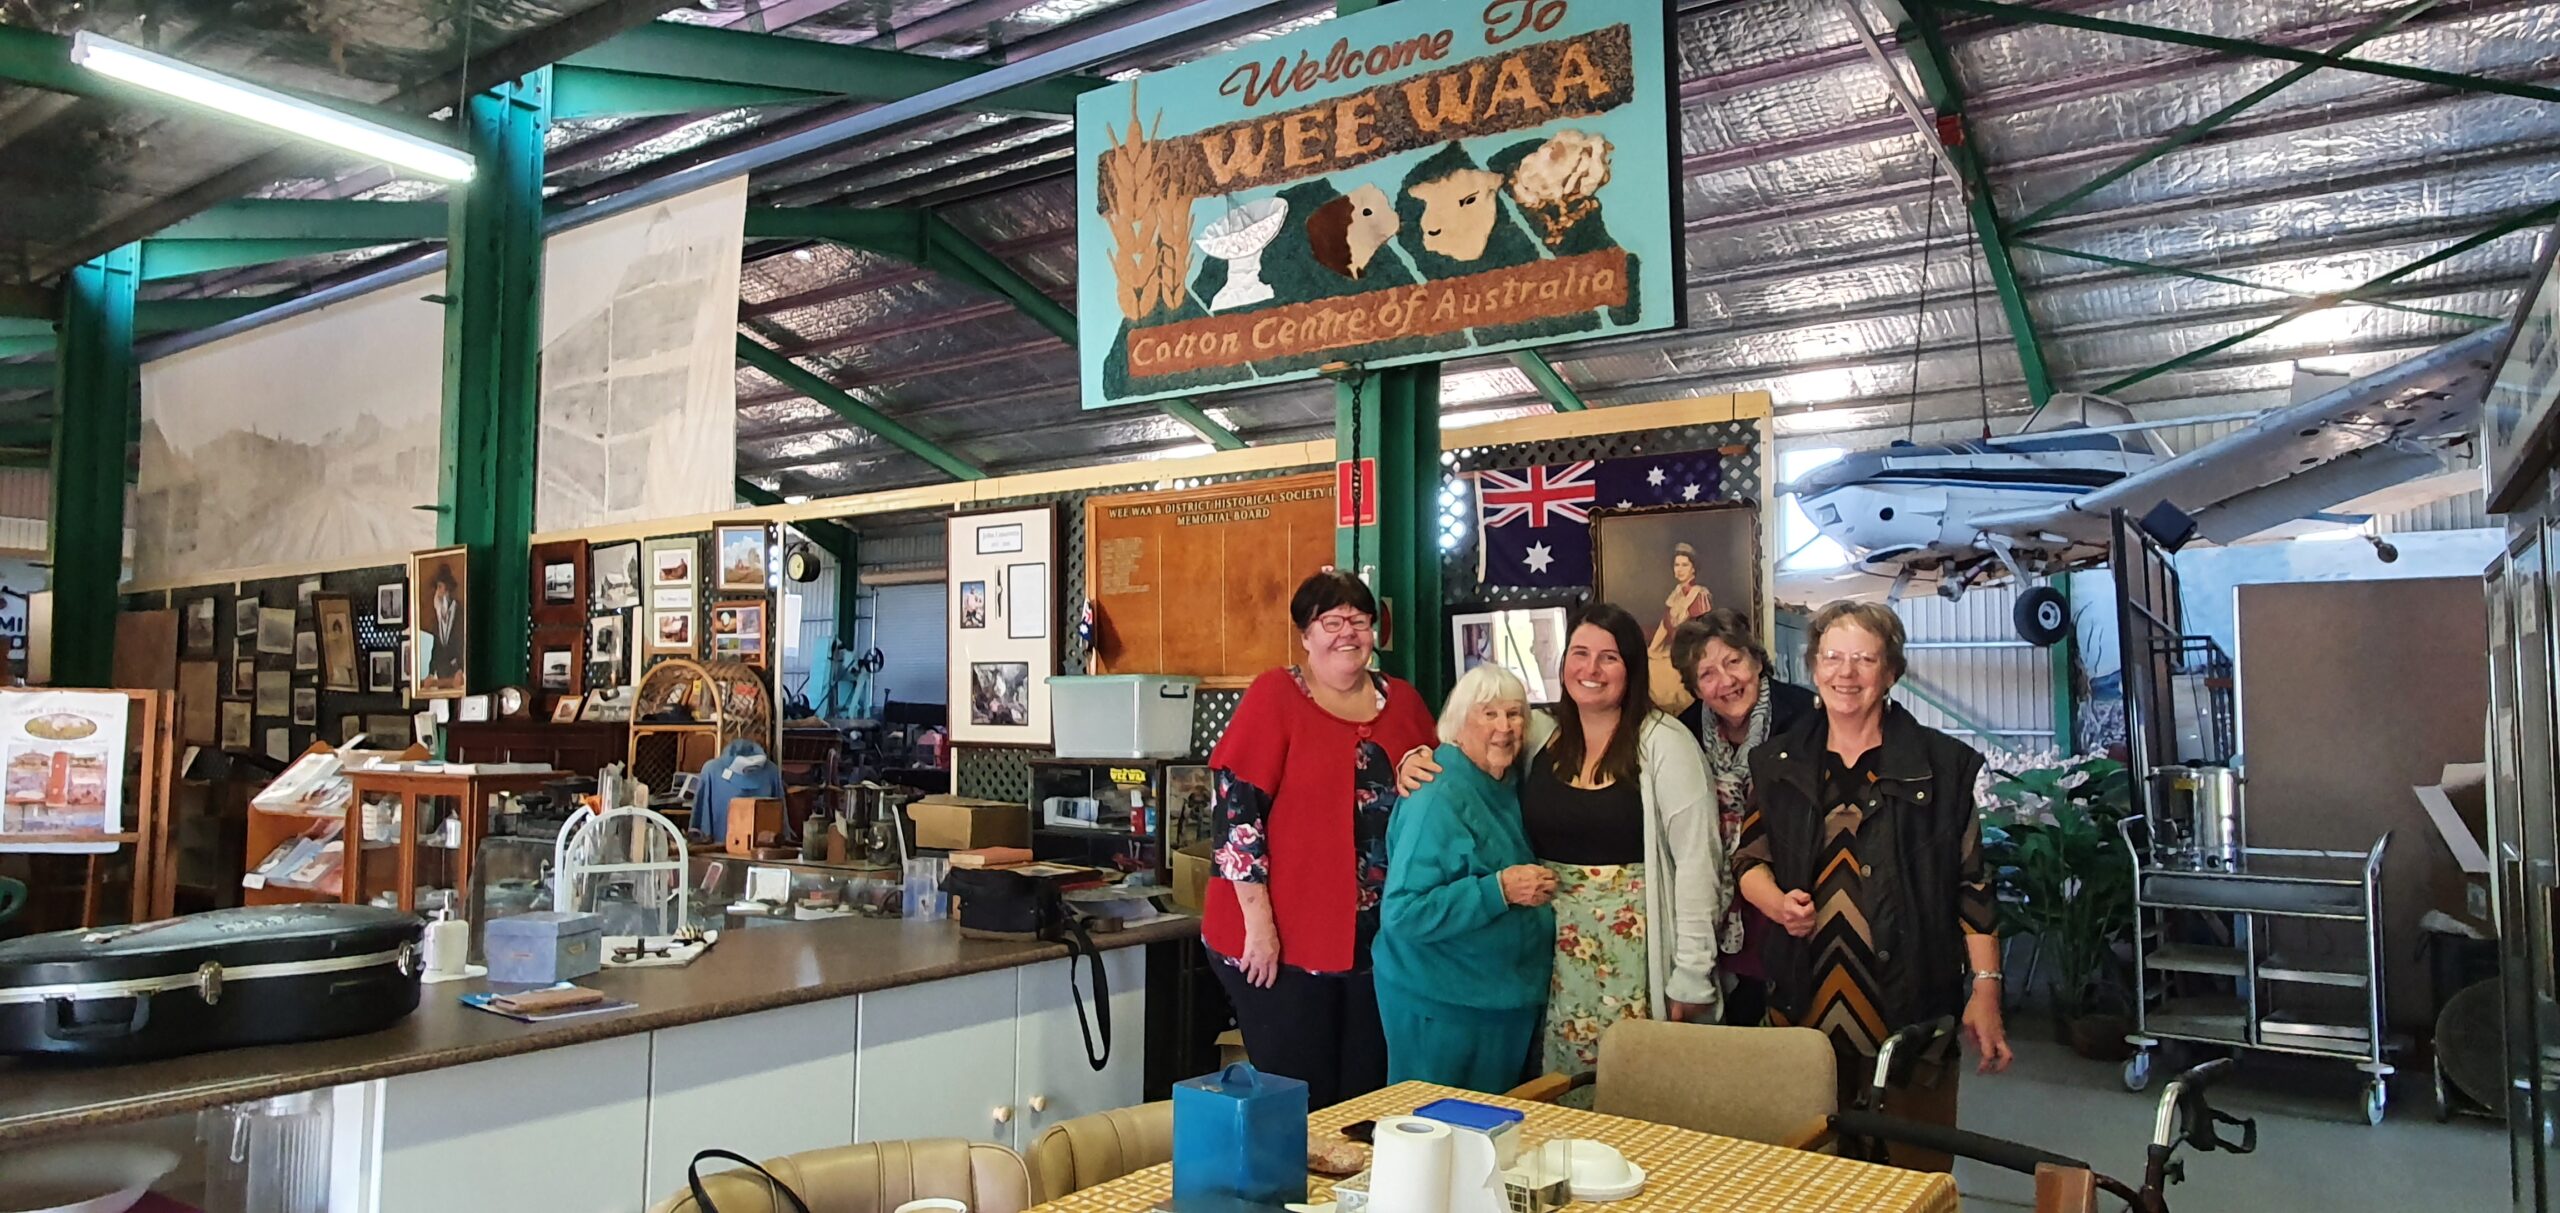 Song tribute to Wee Waa museum